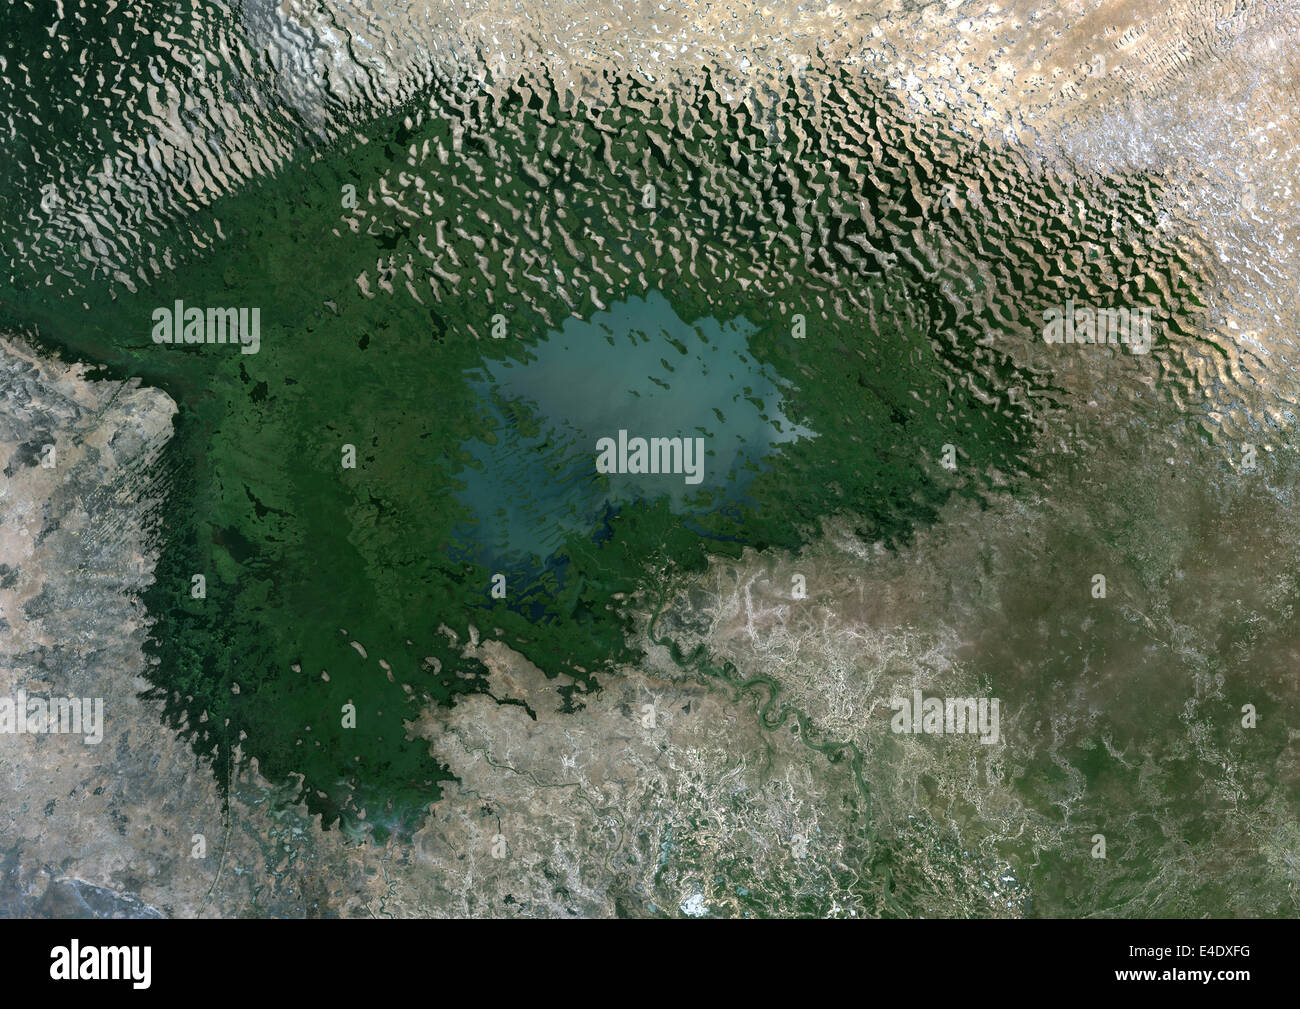 Lake Chad, Chad, In 1999, True Colour Satellite Image. True colour satellite image of Lake Chad, Chad. Image taken in 1999 using Stock Photo